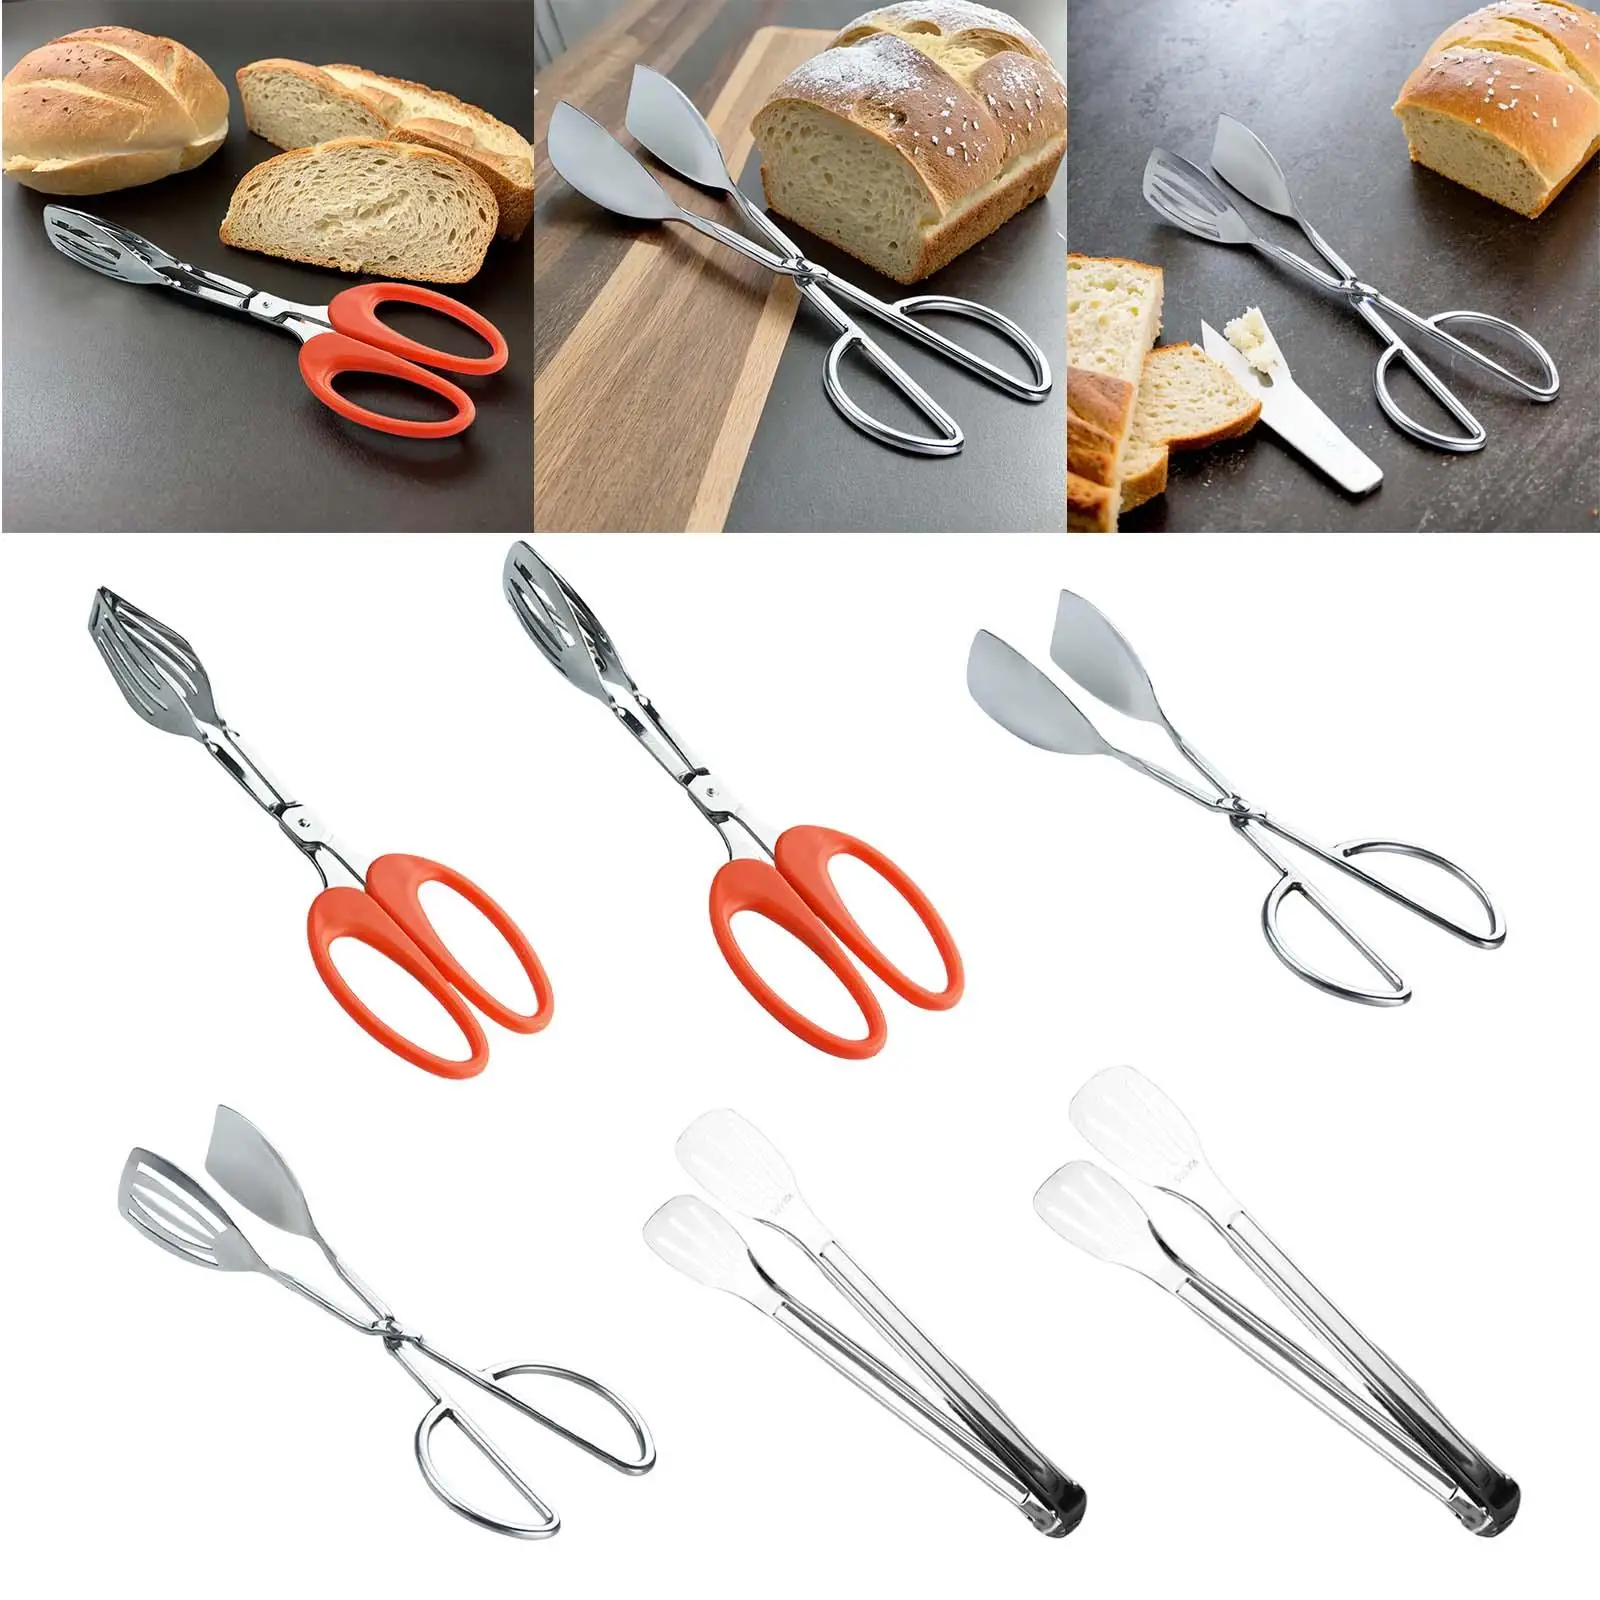 Kitchen Tongs Multifunctional Food Serving Tongs for Grilling Cooking Baking